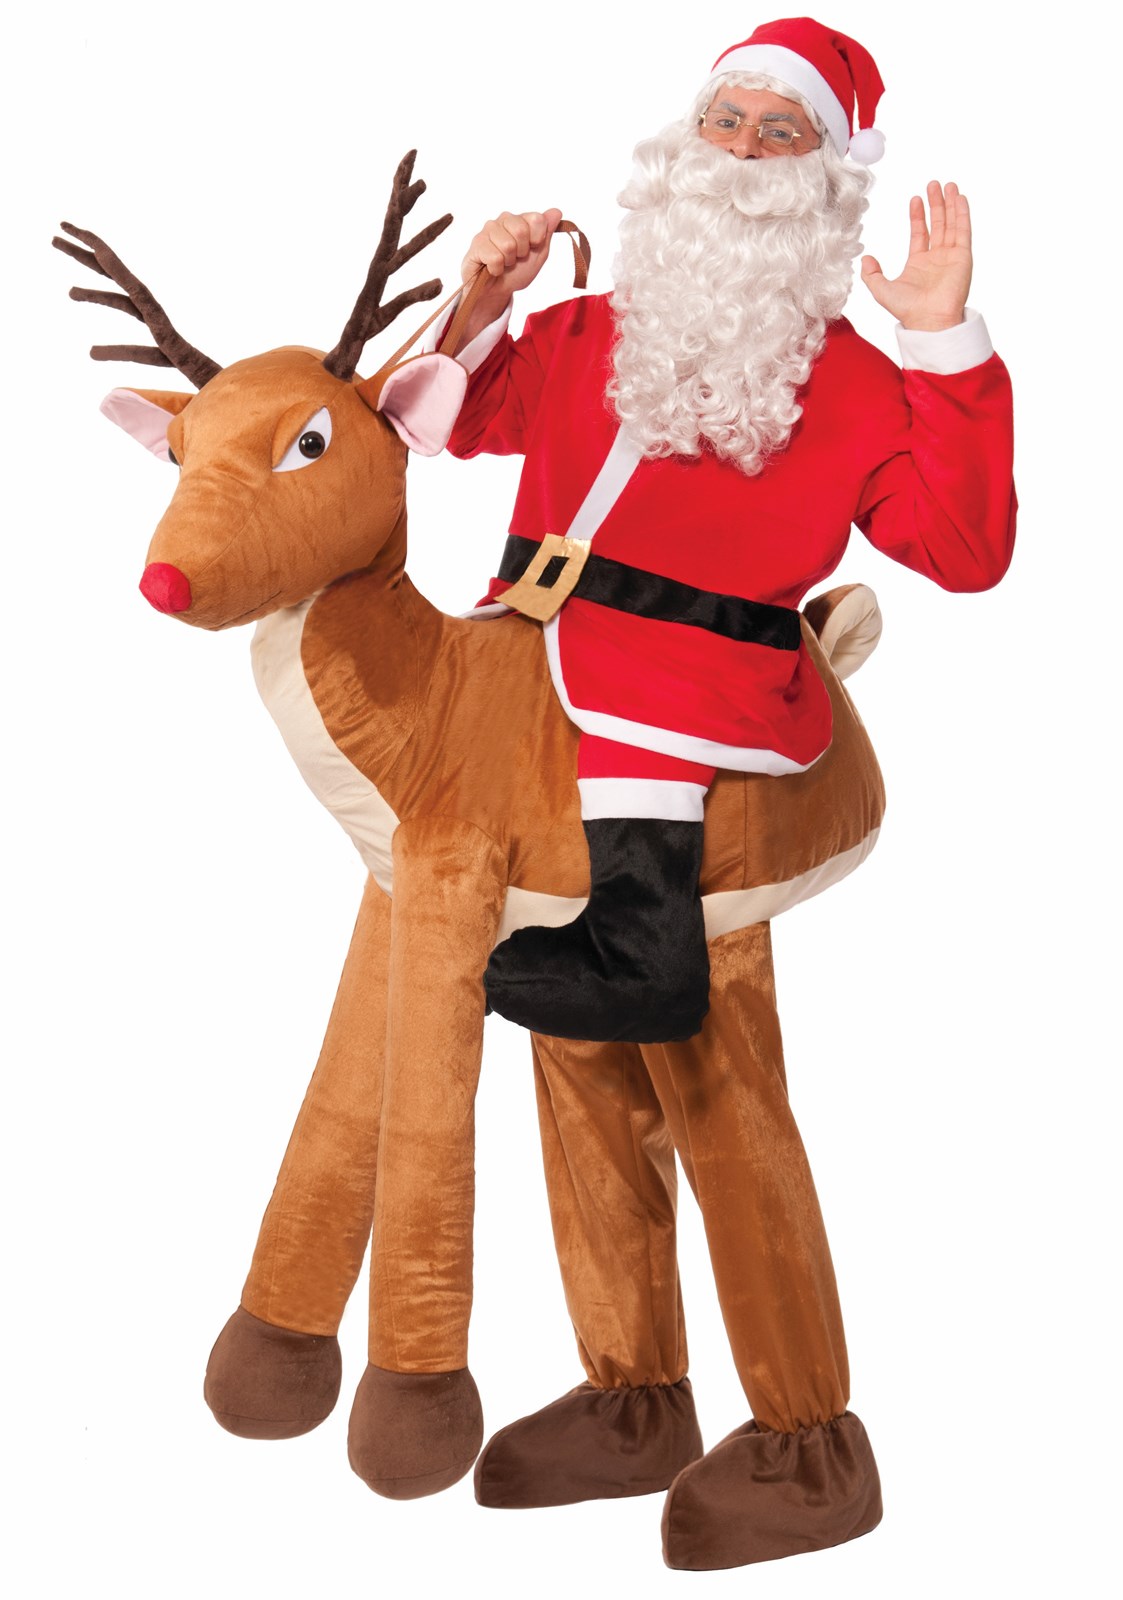 Santa on a Reindeer Costume for Adults